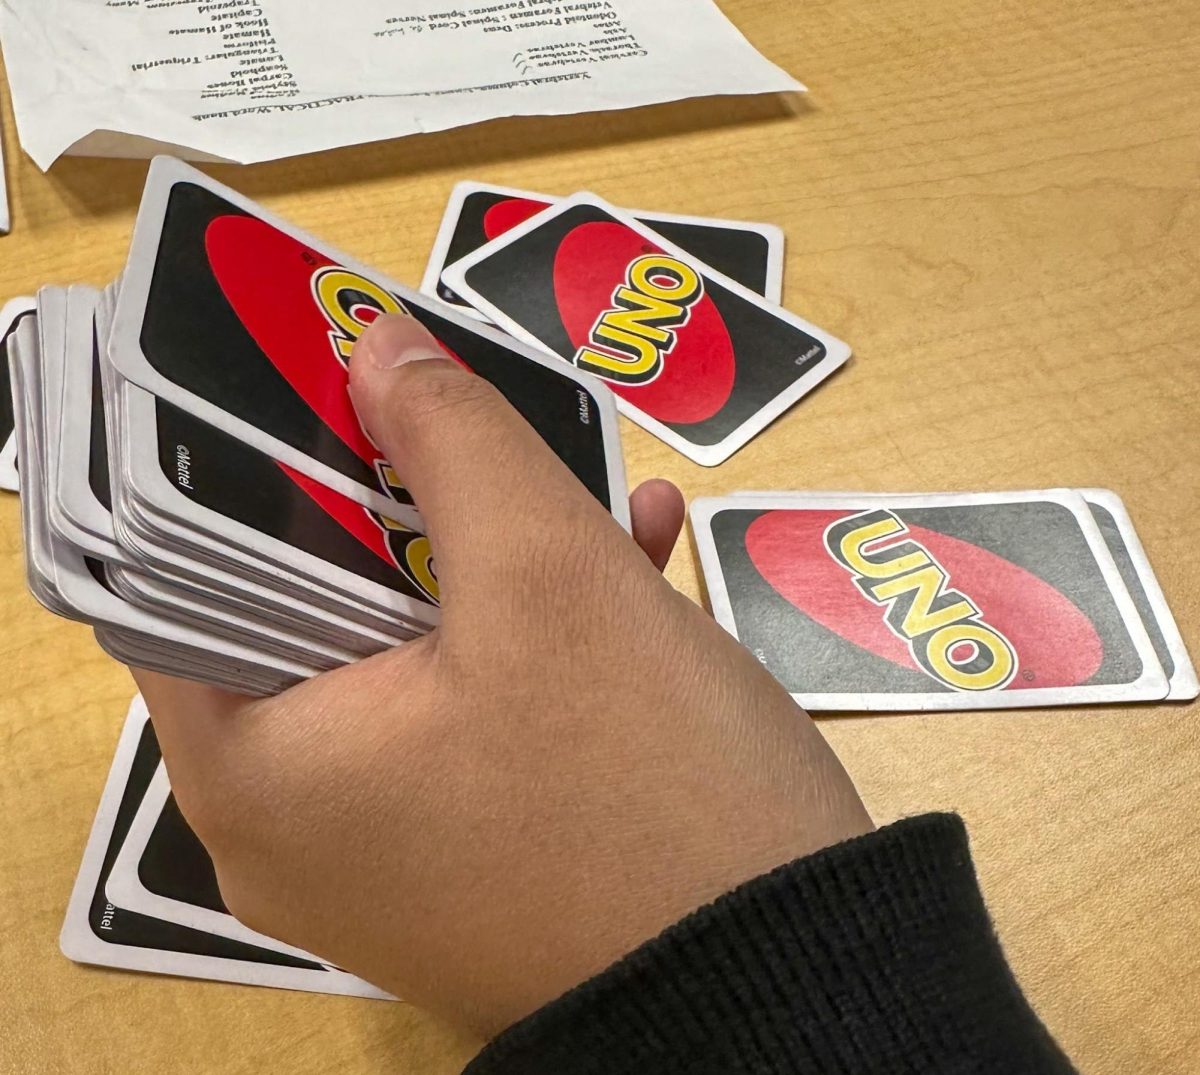 Deck+of+Uno+cards